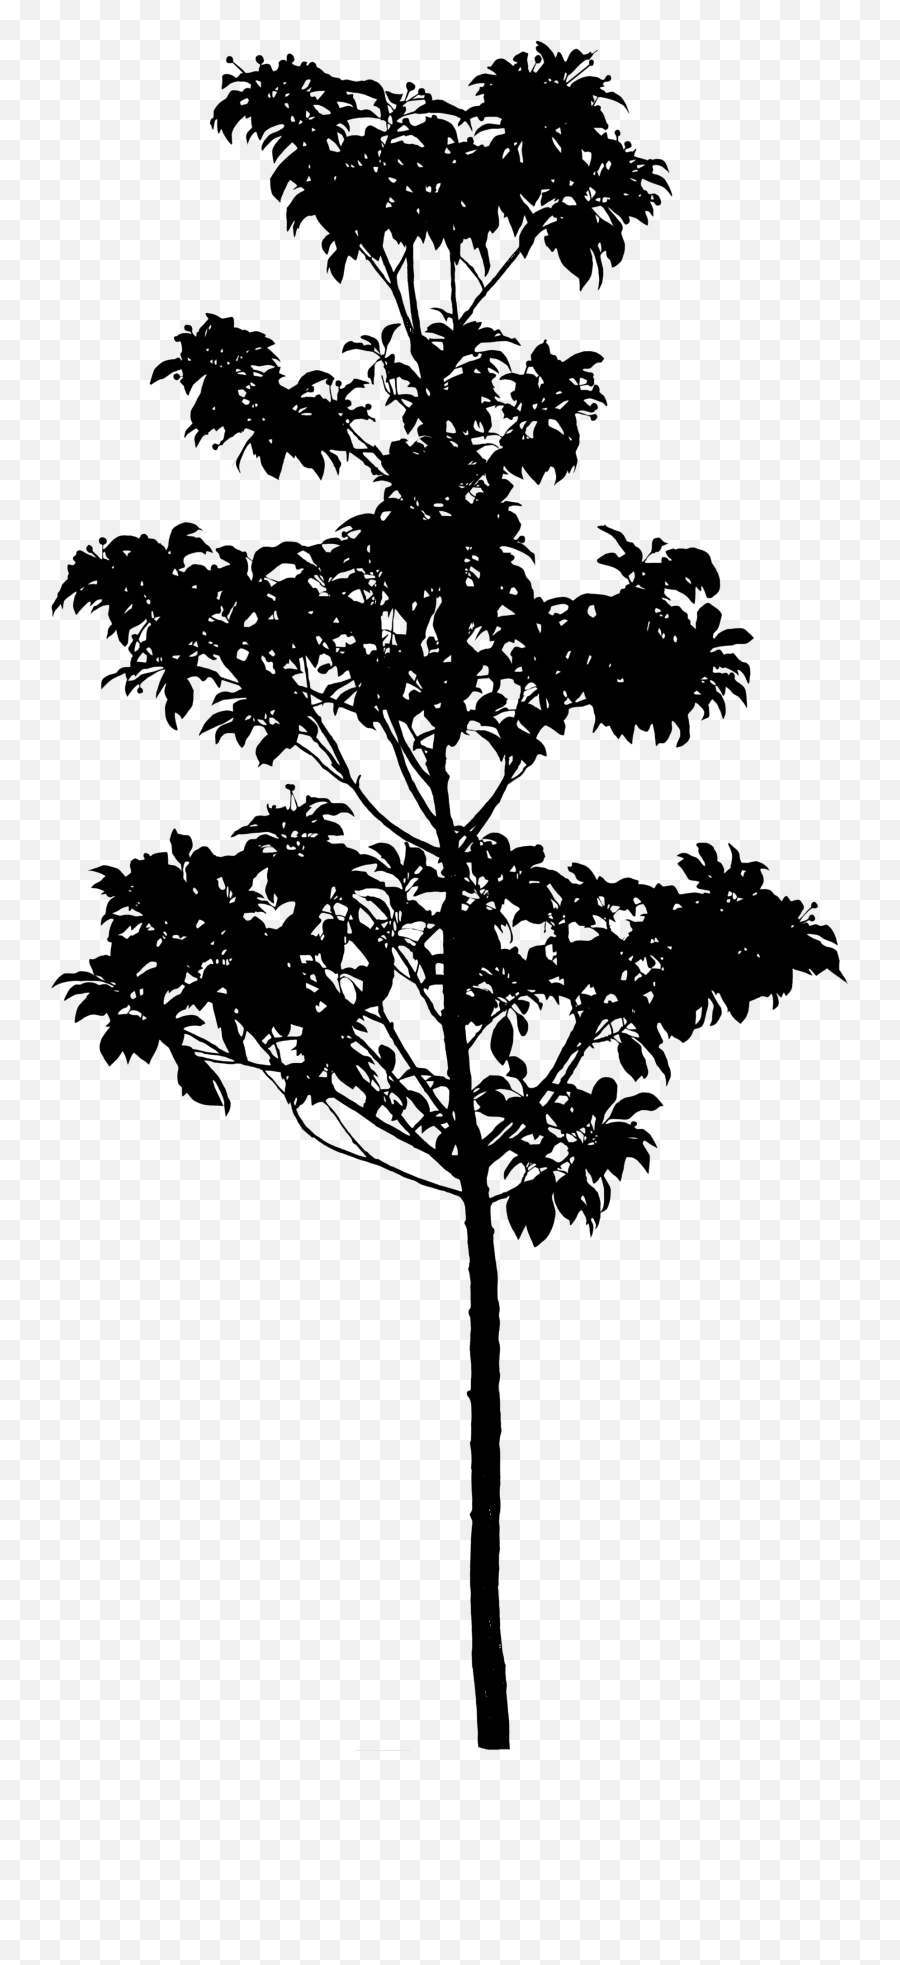 Silhouette Pine Tree Longstalk Holly Photography - Bald Cypress Silhouette Emoji,Pine Tree Clipart Black And White